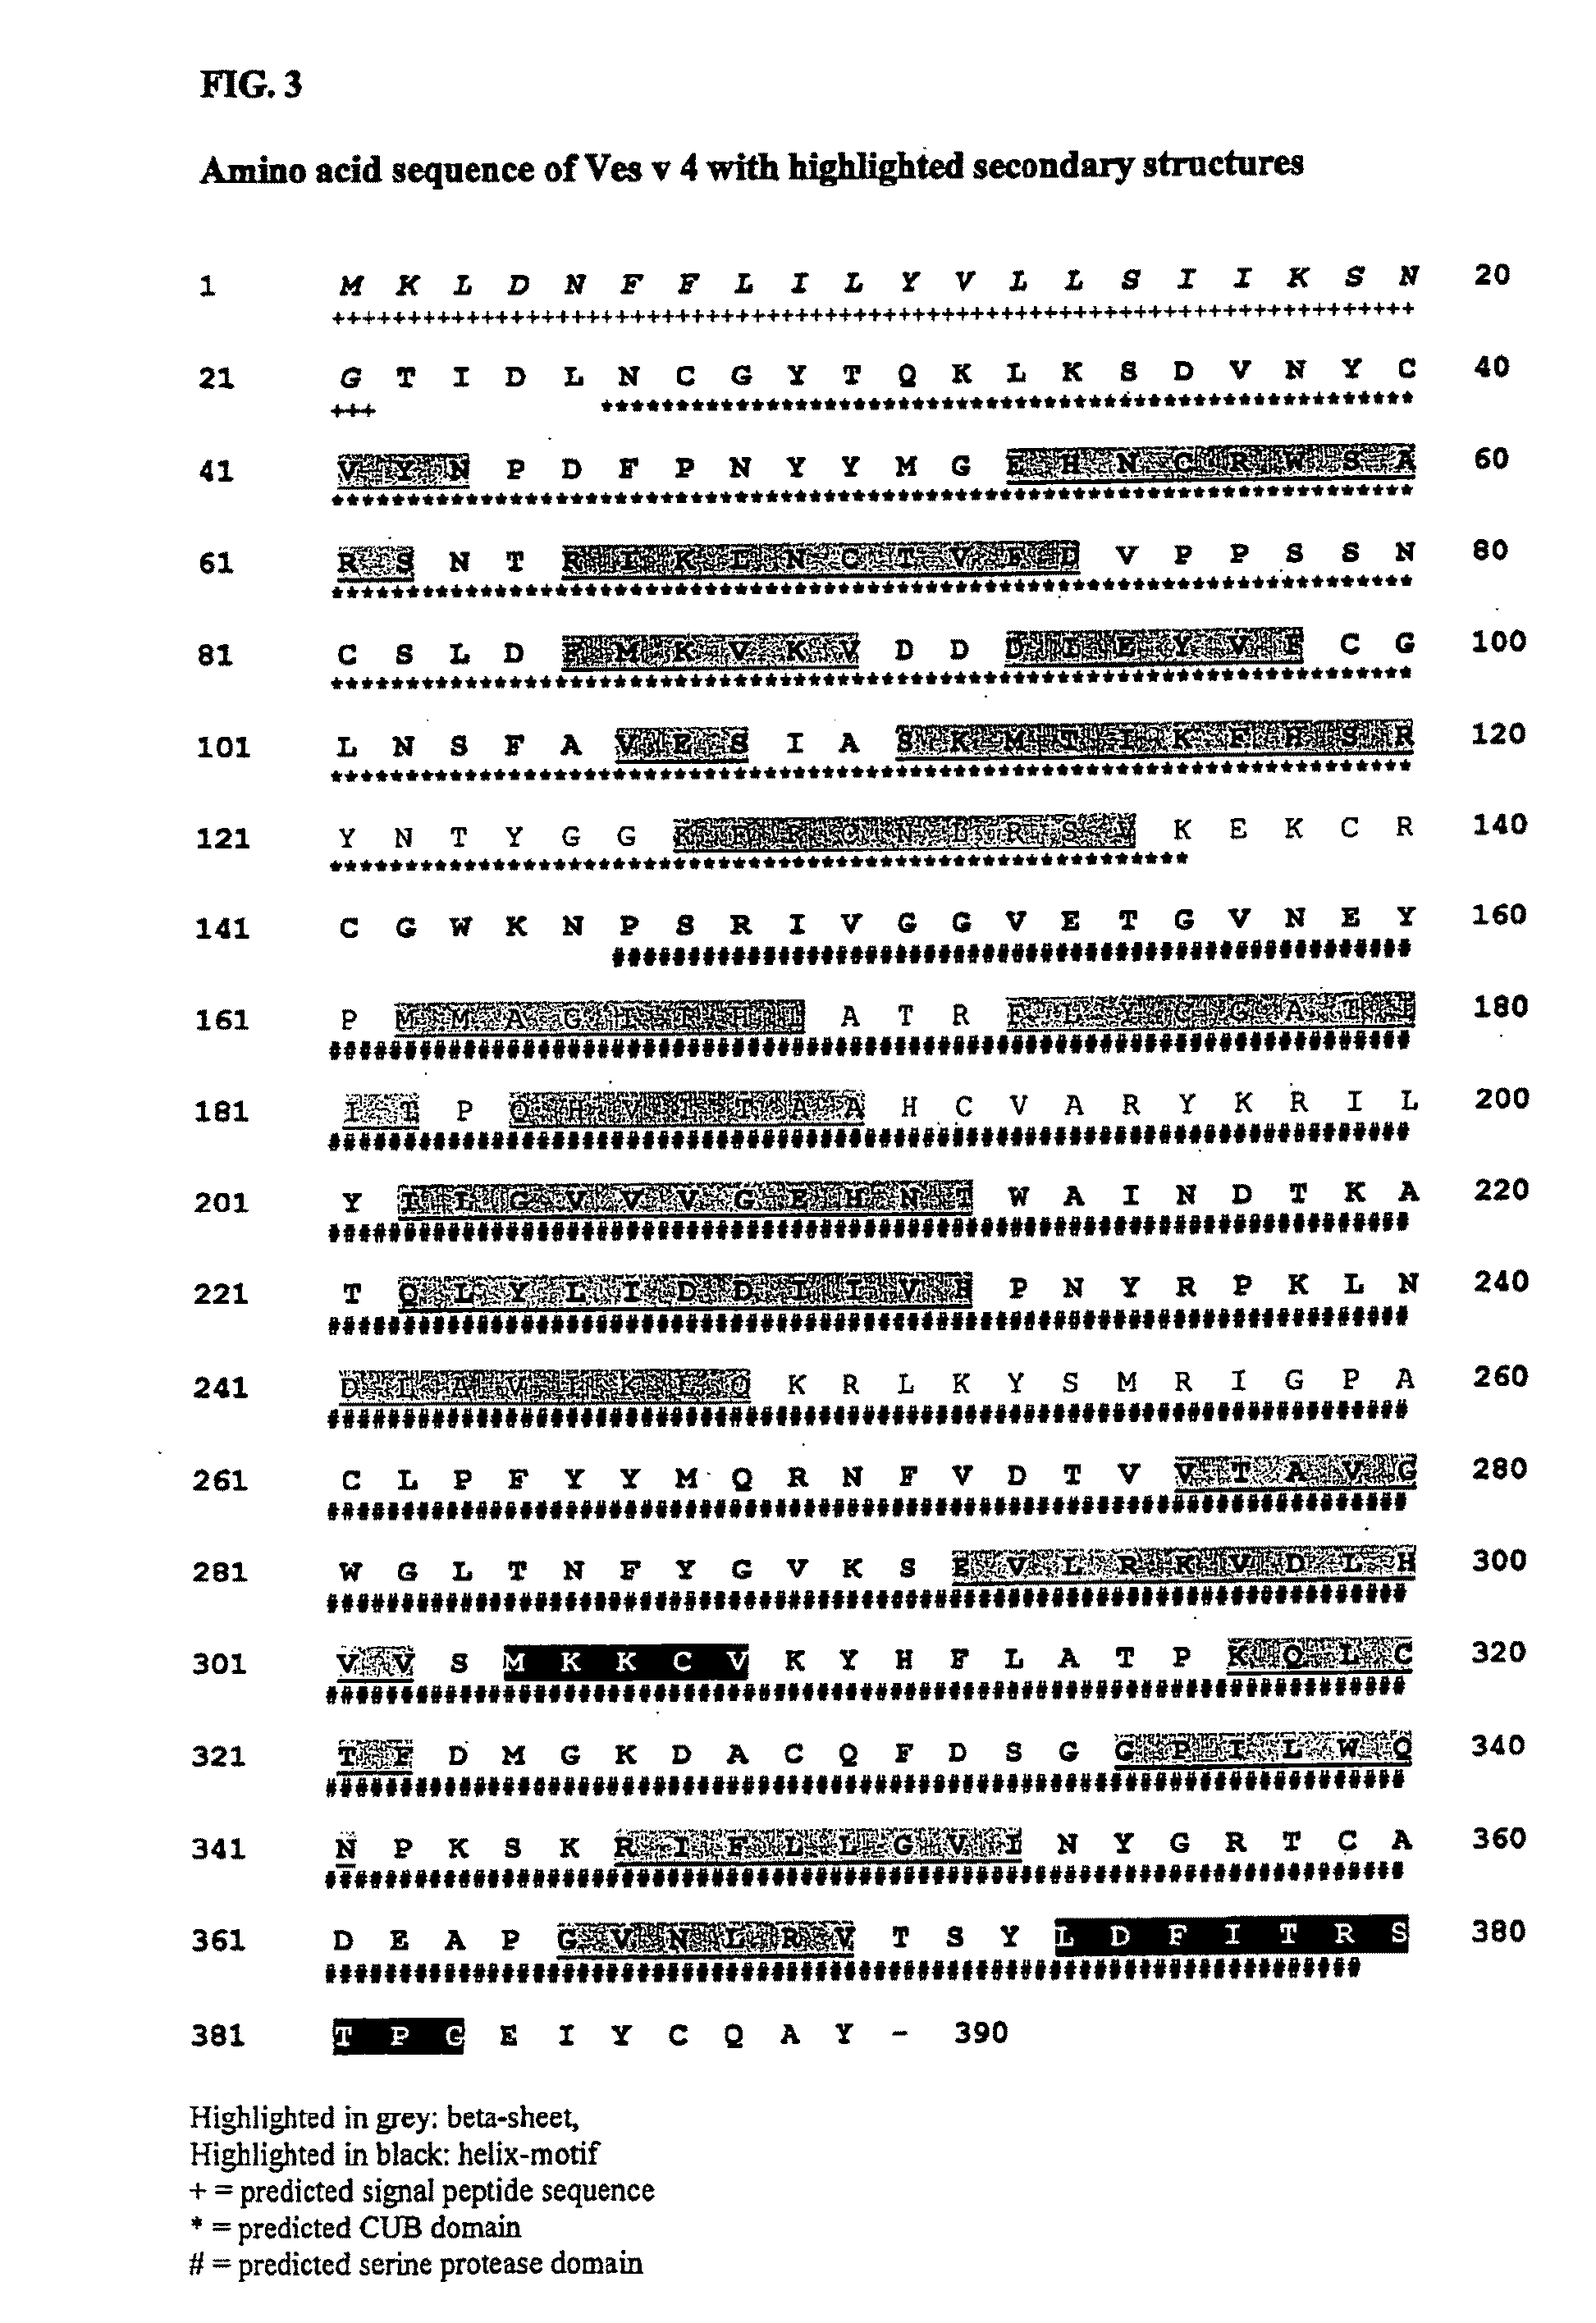 Cloning and recombinant productions of vespula venom protease and methods of use thereof